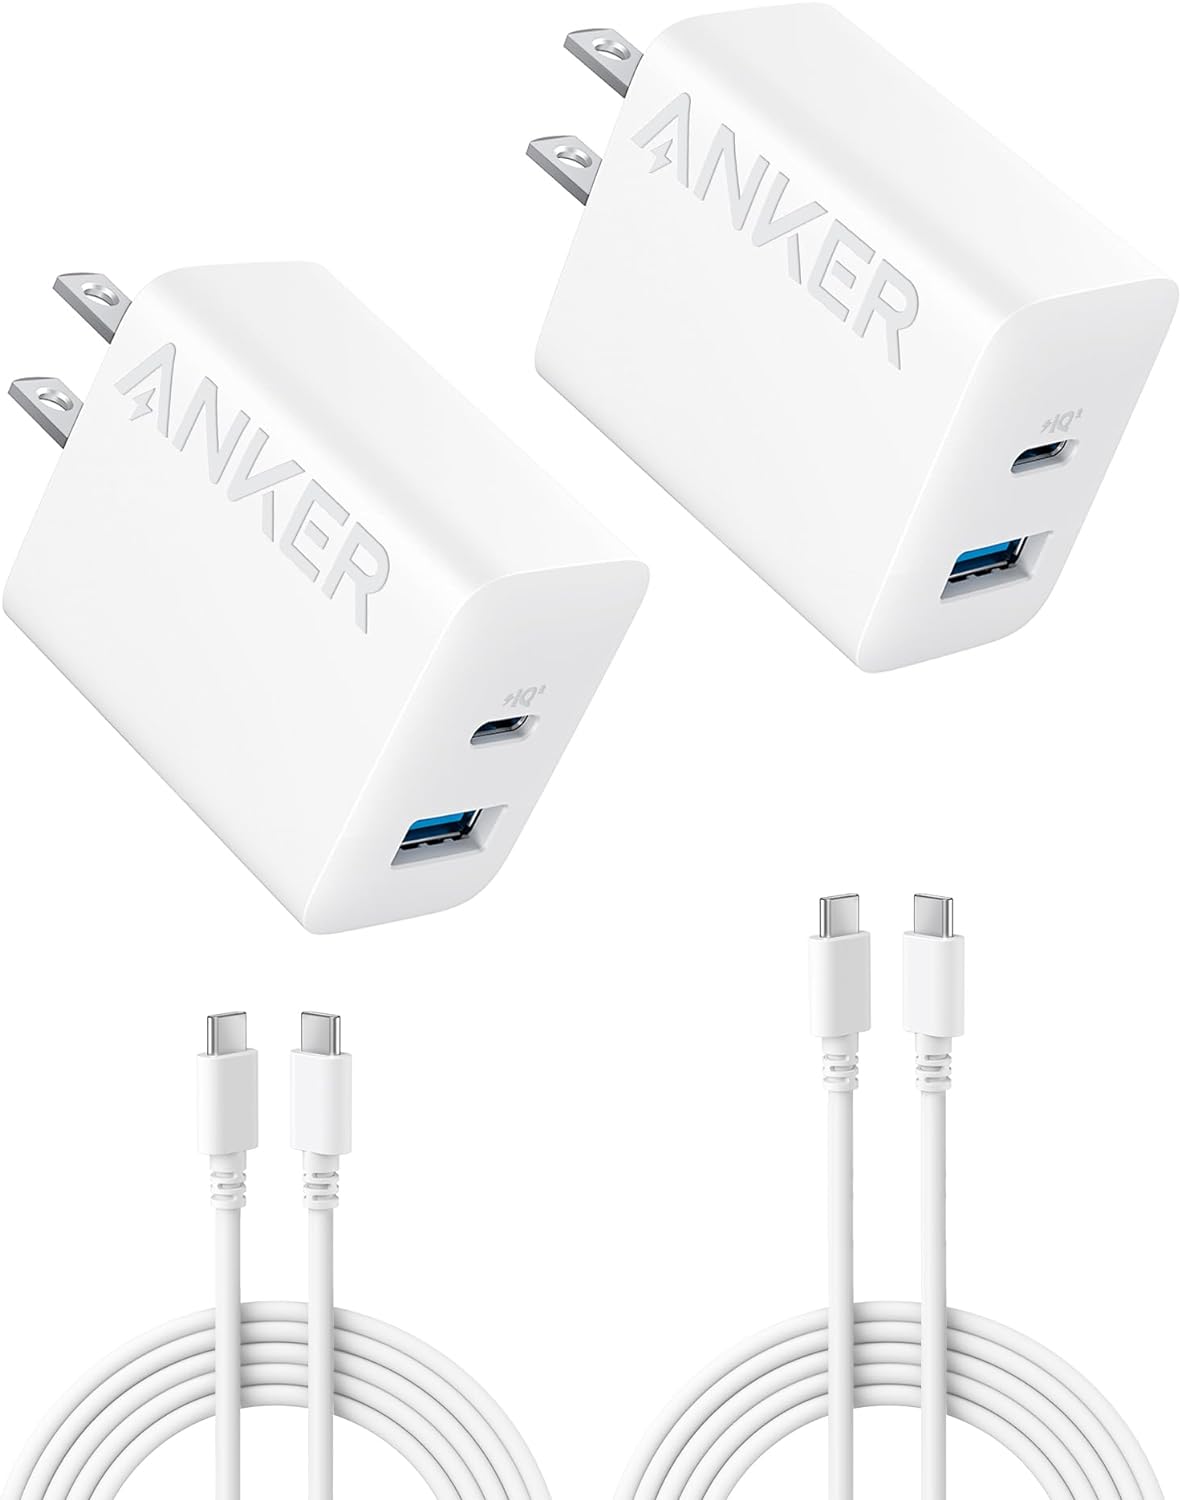 2-Pack Anker 20W 2-Port USB Type-C + Type-A Wall Charger w/ 2x 5' Type-C Cables (White/Black) $15.29 + Free Shipping w/ Prime or on $35+